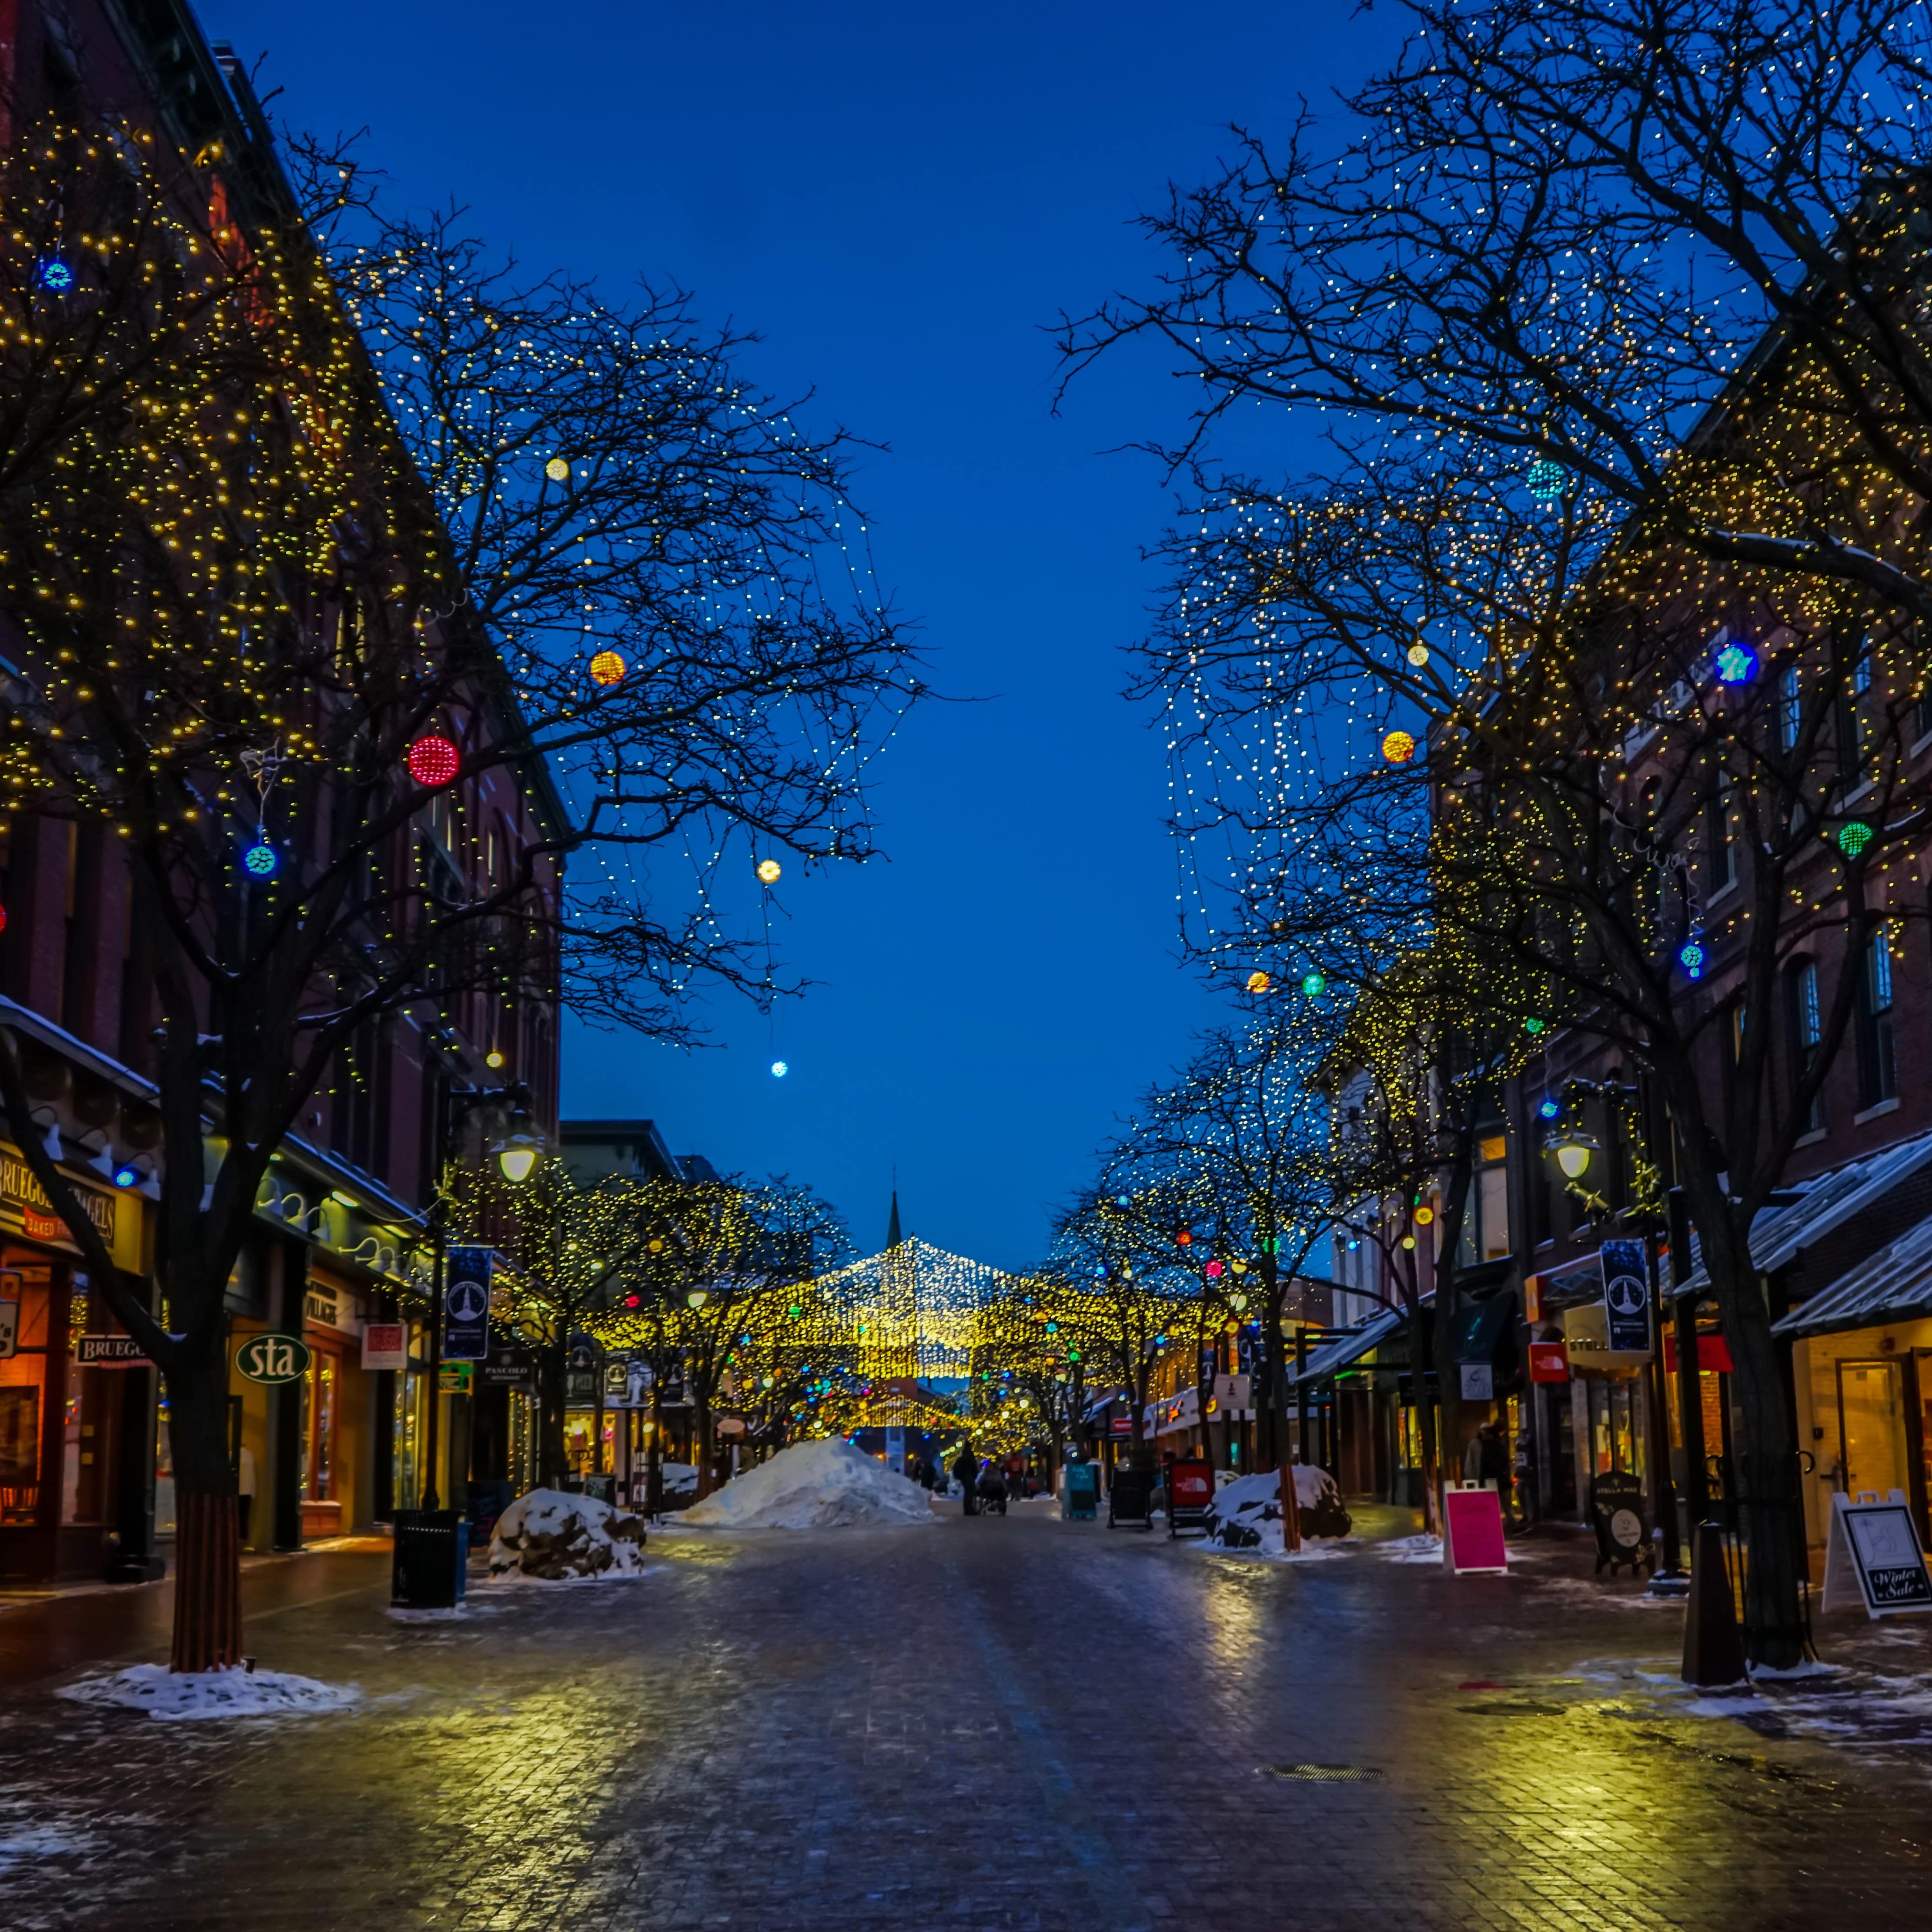 Attractively lit historic main street in Vermont at night